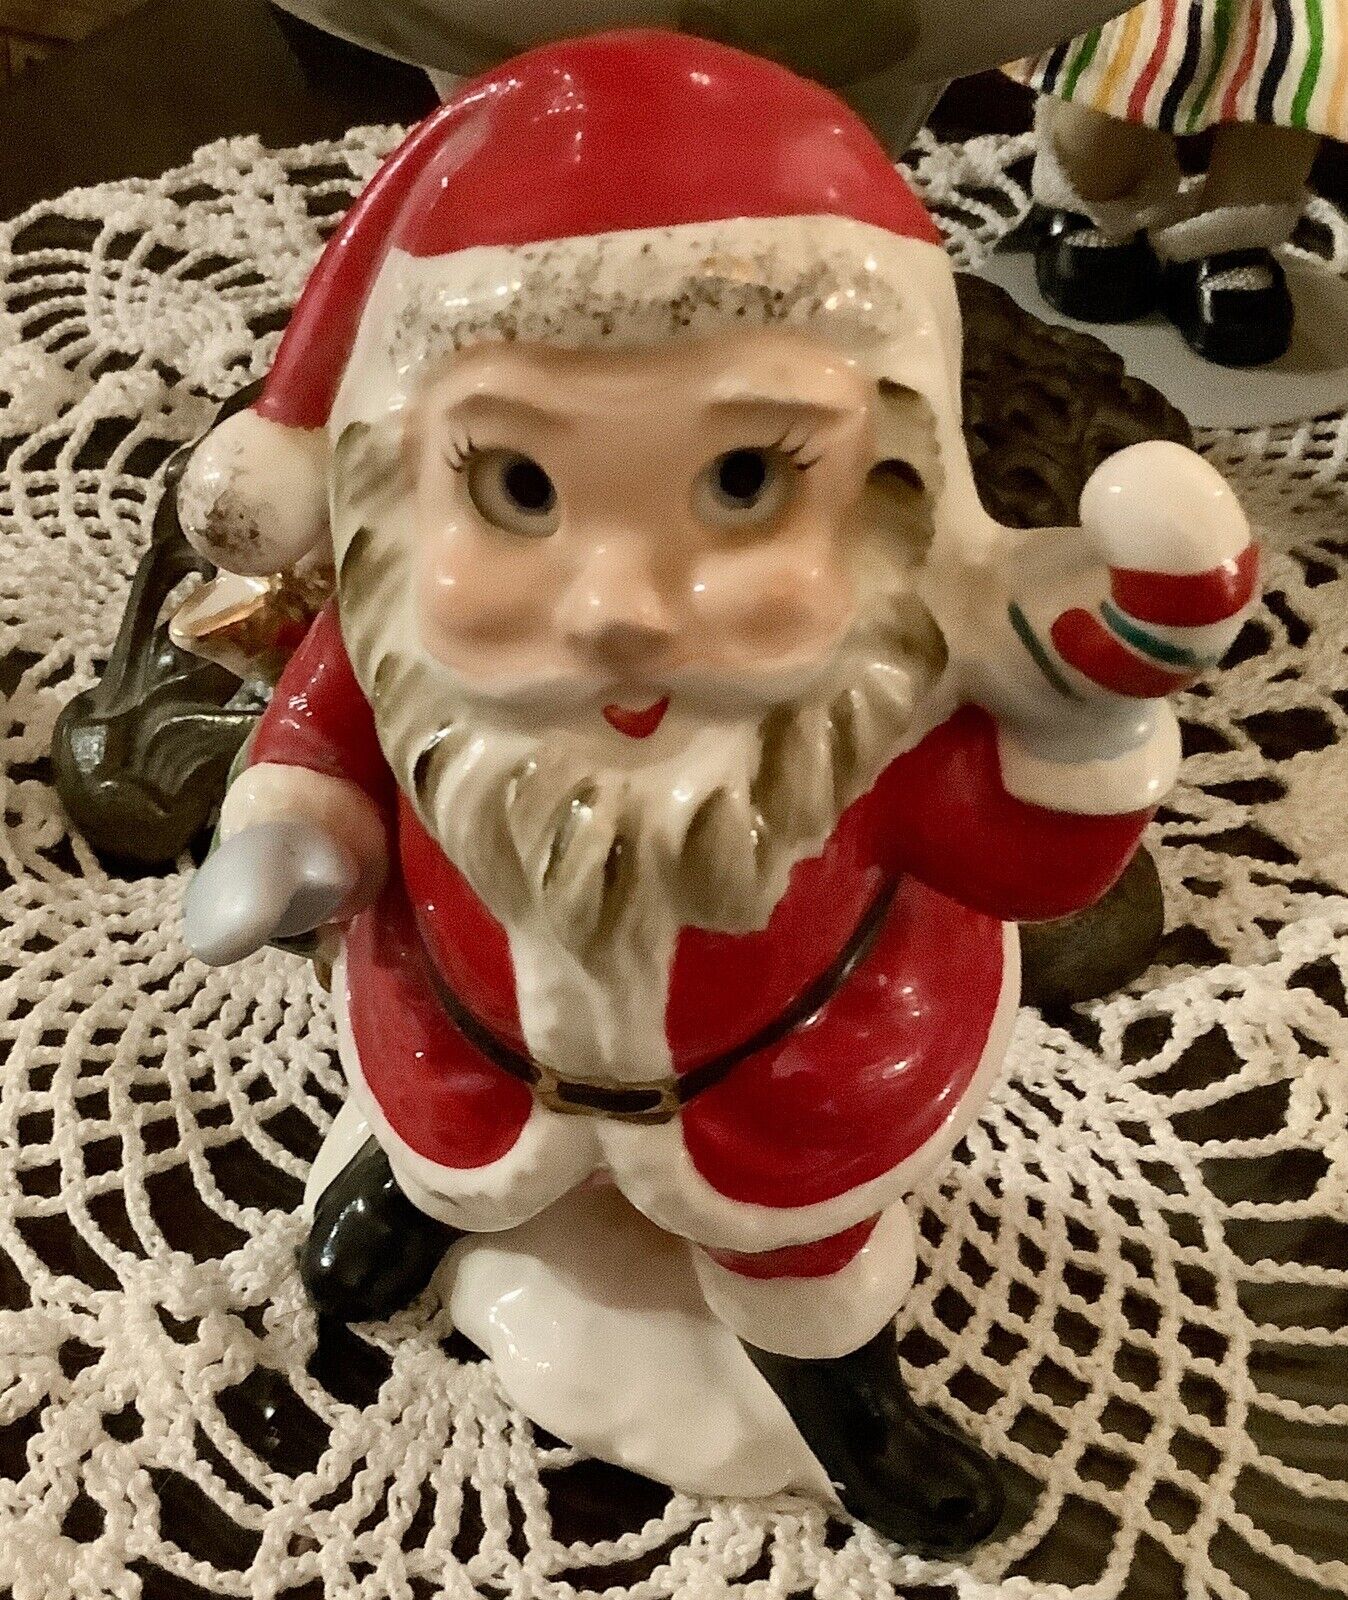 Vintage “Rare” Ucagco Japan 6” Hand Painted Santa Clause With Open/Close Eyes